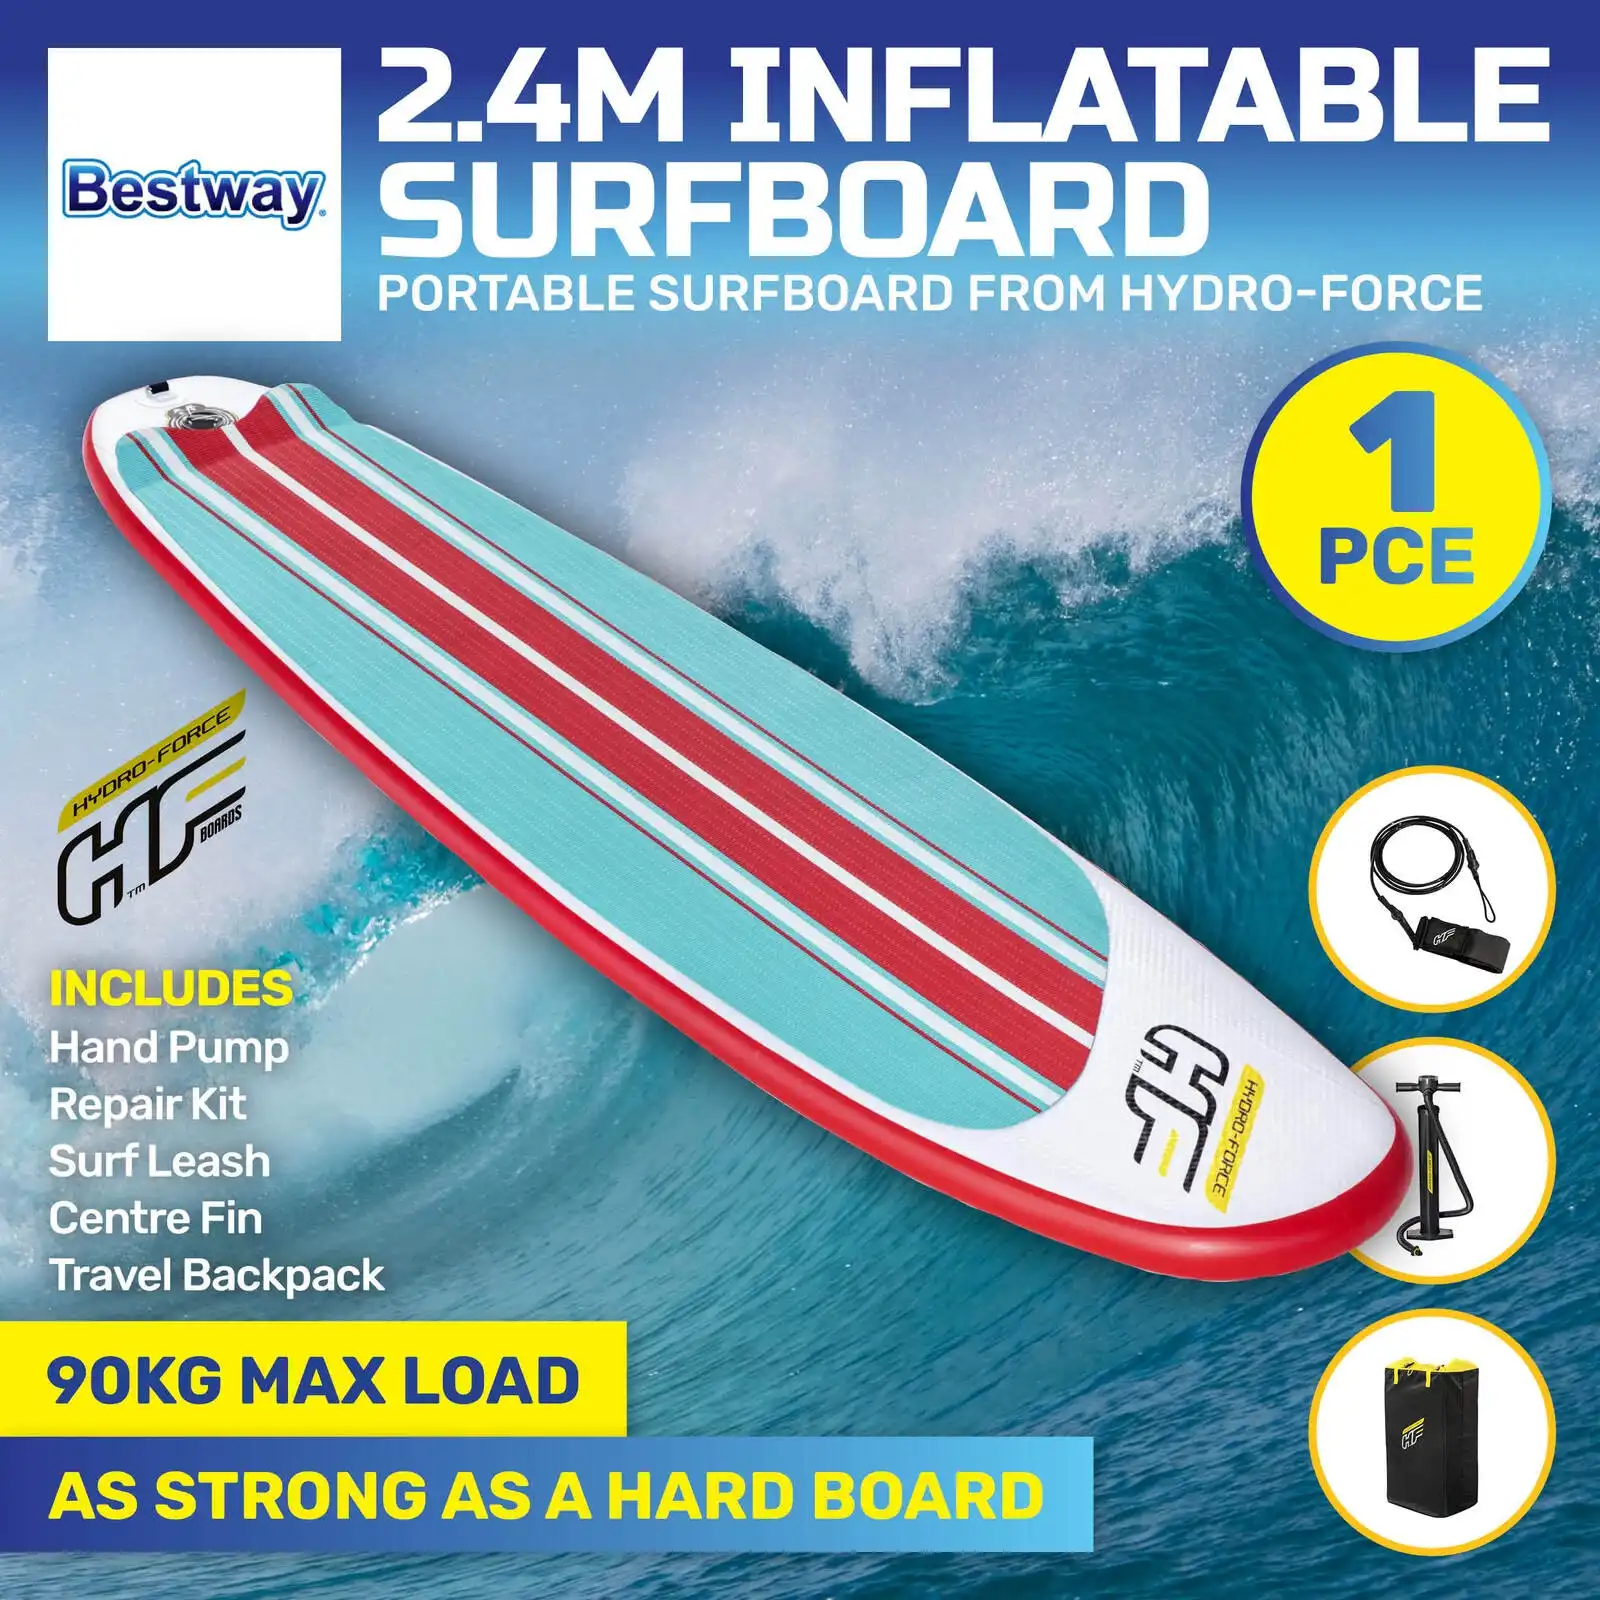 Bestway® 2.4m Surfboard Inflatable Essentials Included Innovative Technology